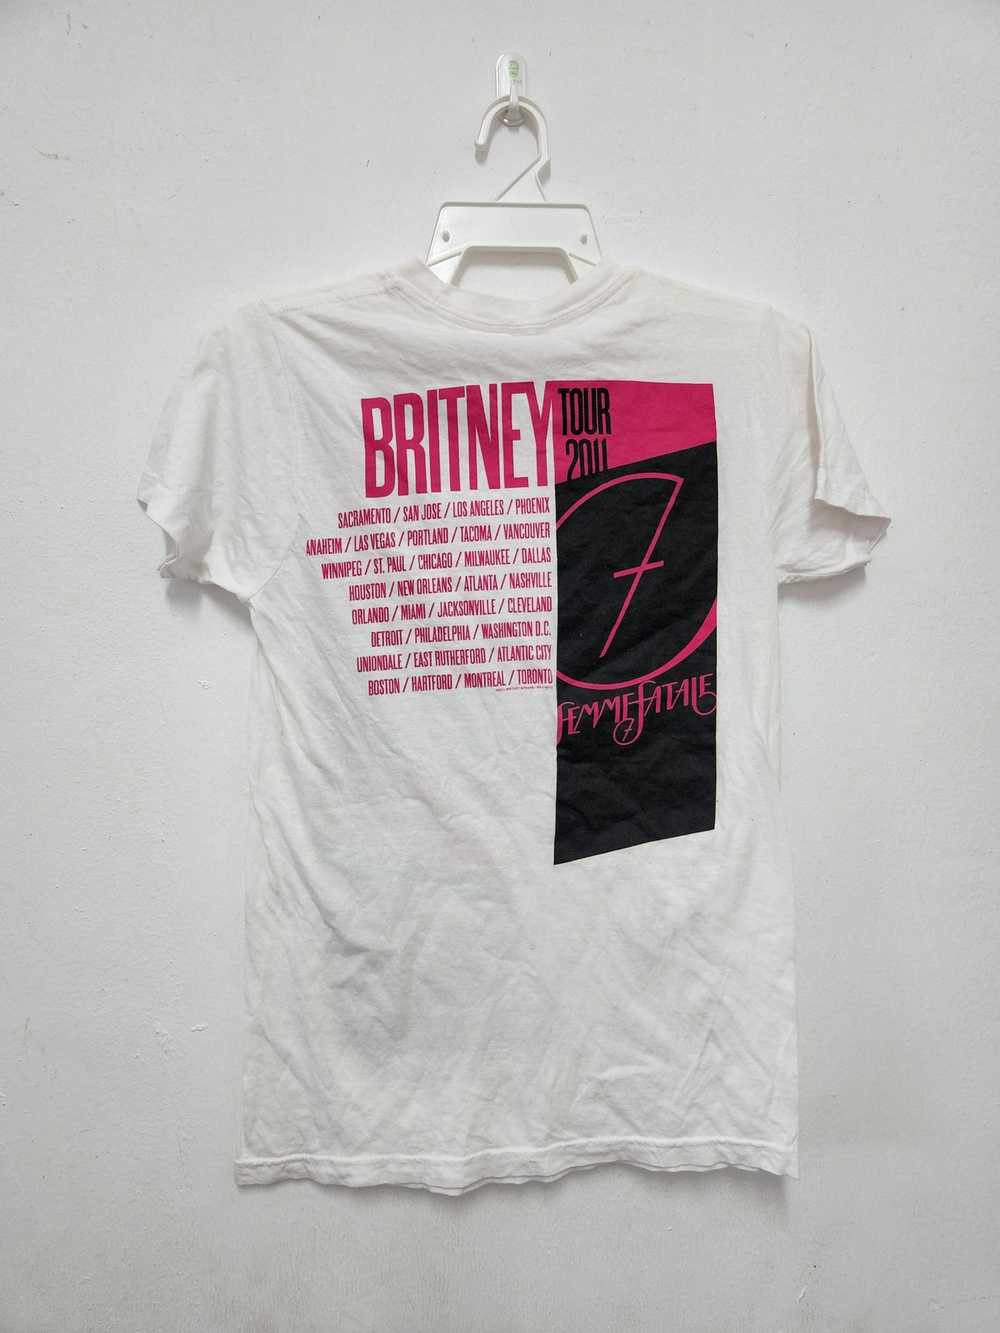 Band Tees Britney Spears 2011 Tour - image 3